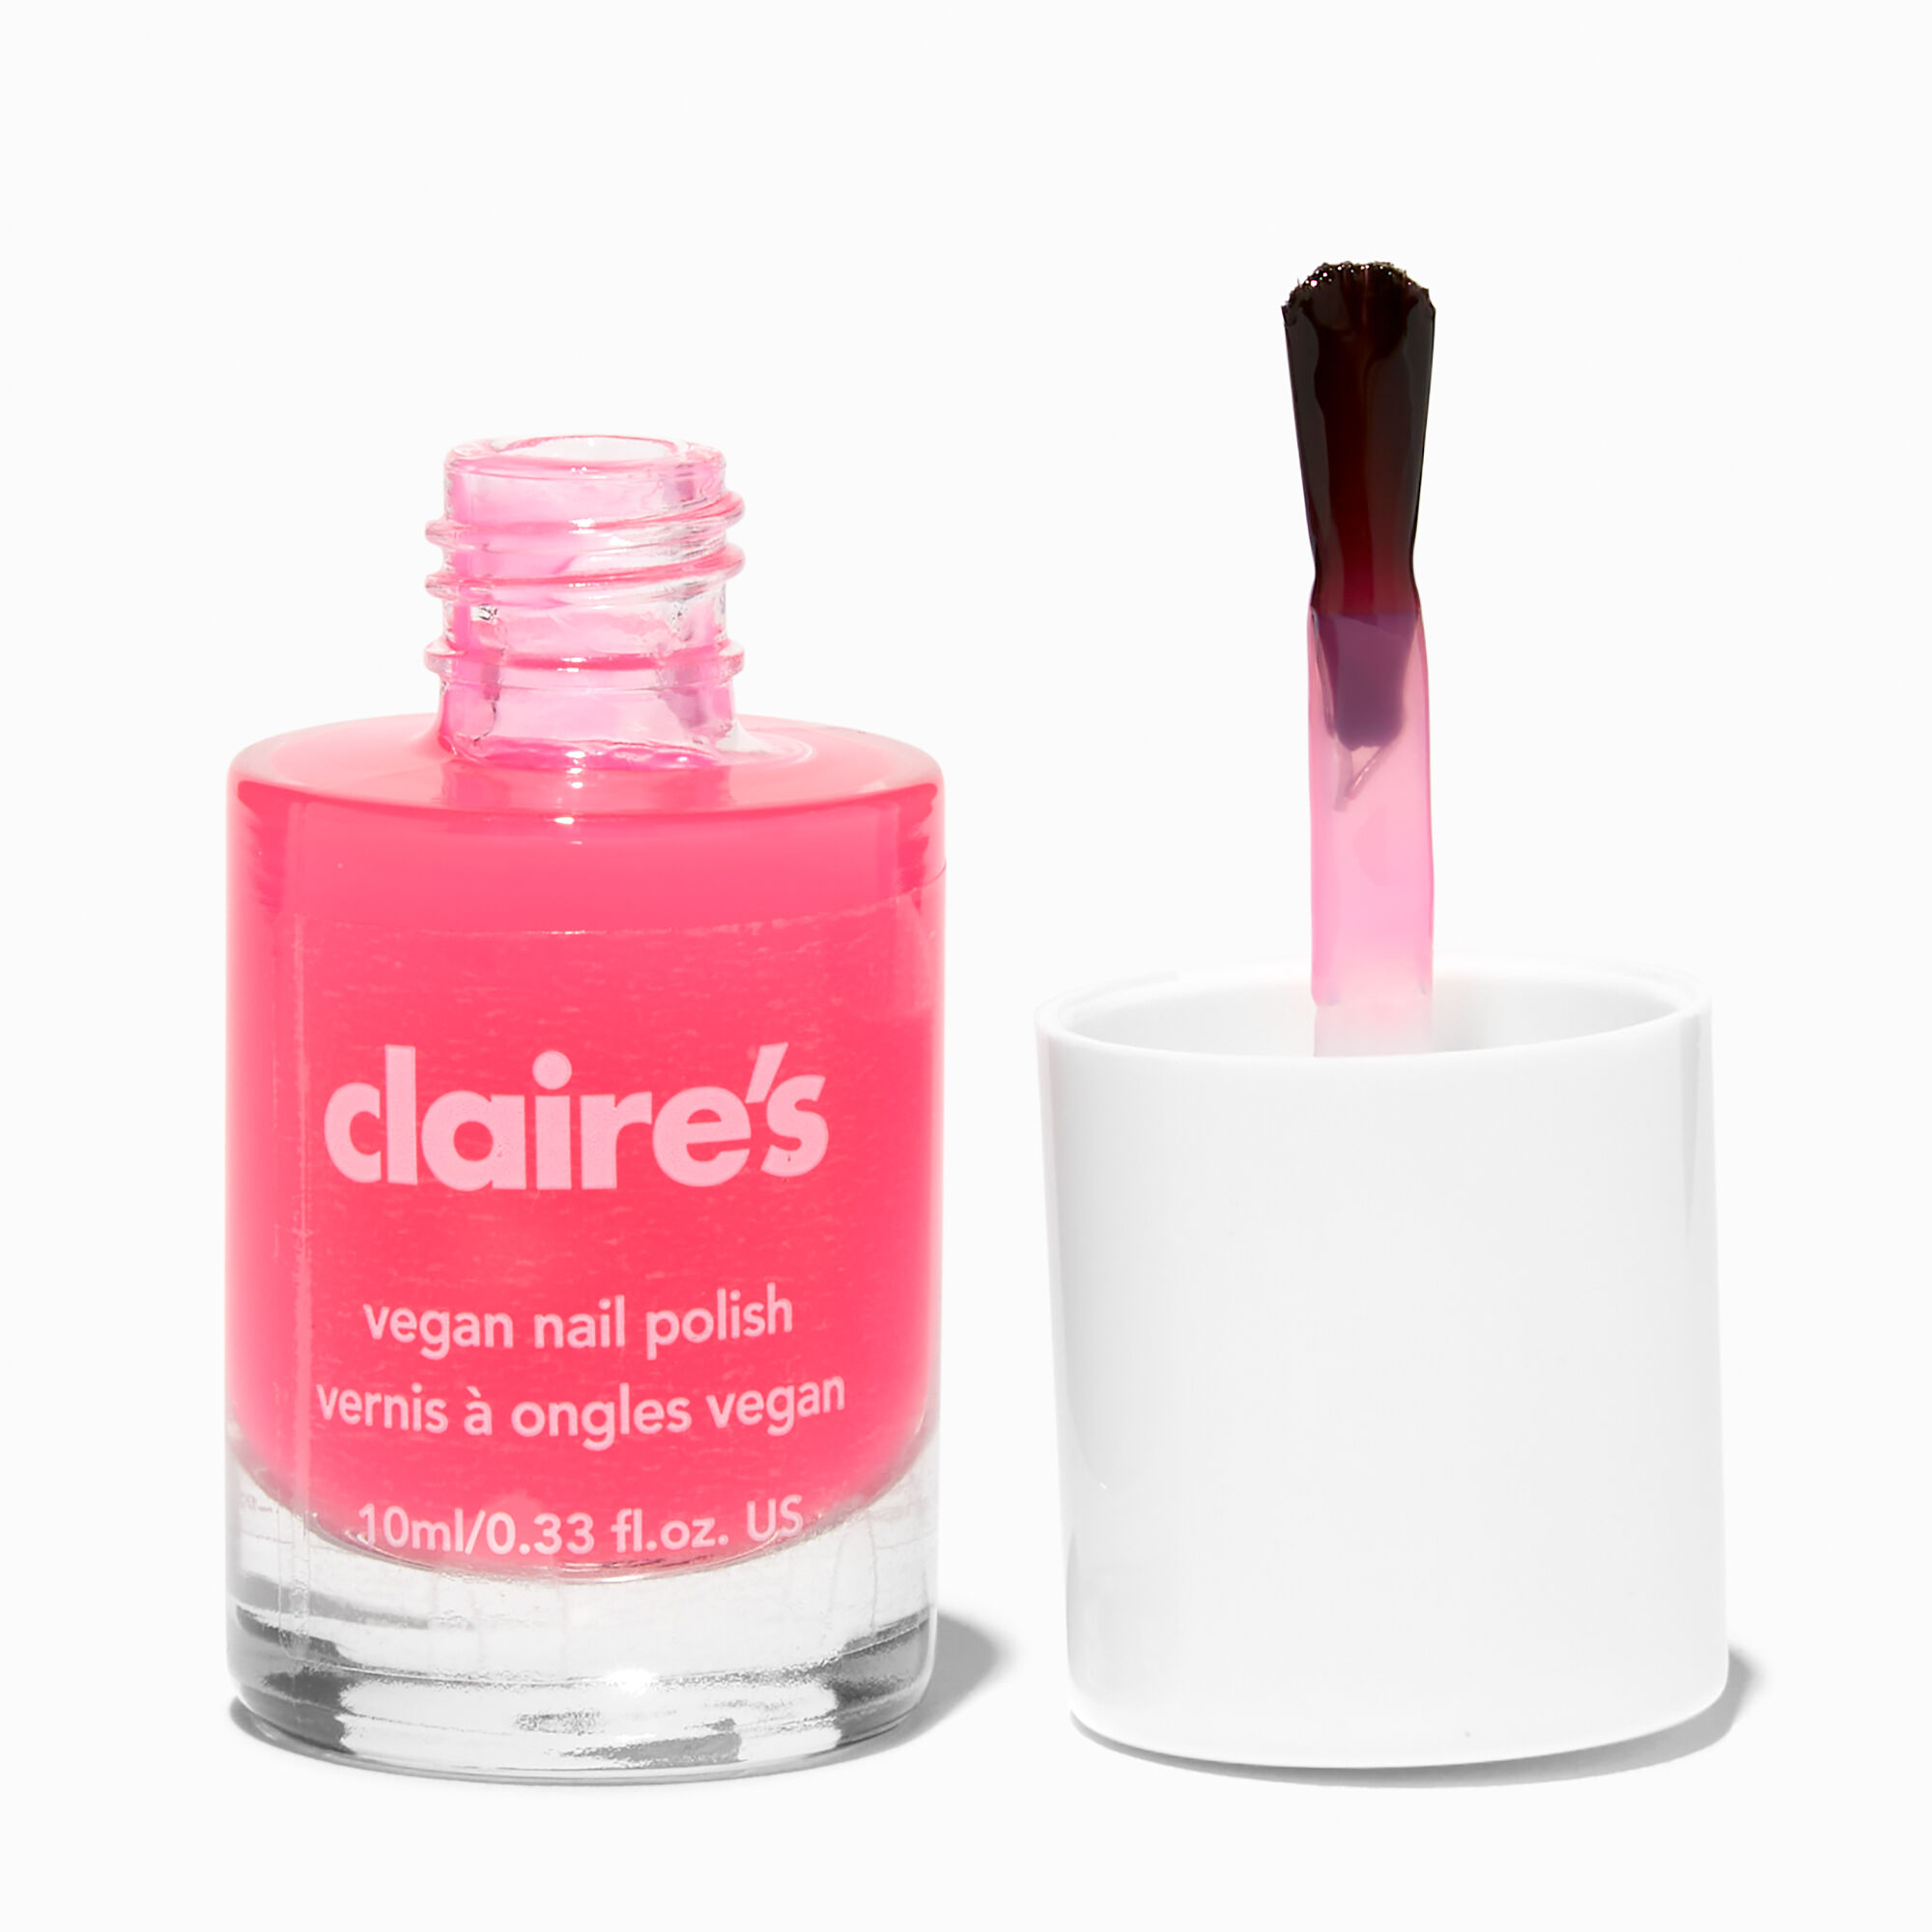 View Claires Vegan Nail Polish Jelly Shoes information